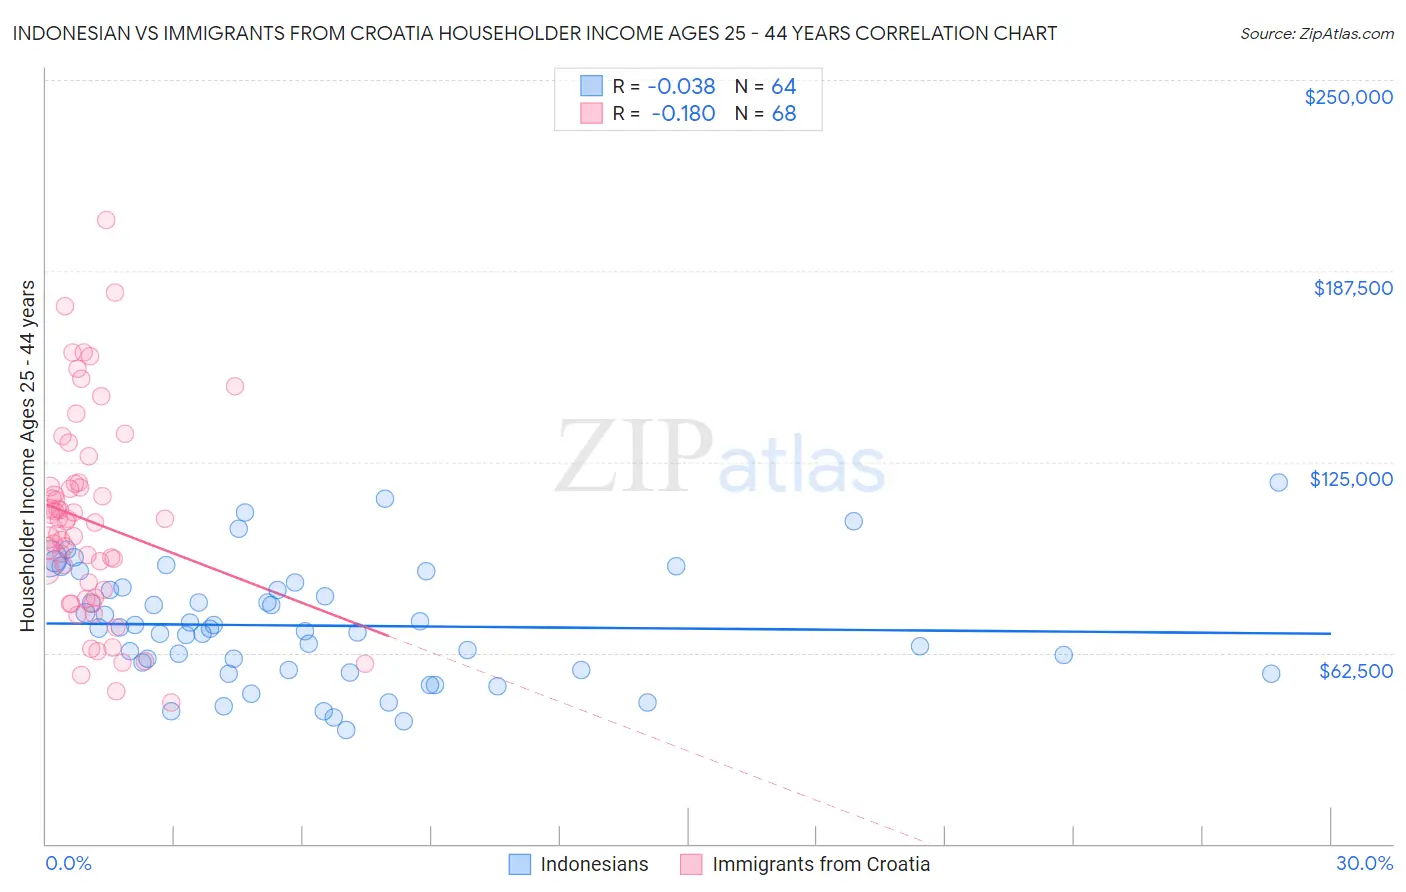 Indonesian vs Immigrants from Croatia Householder Income Ages 25 - 44 years